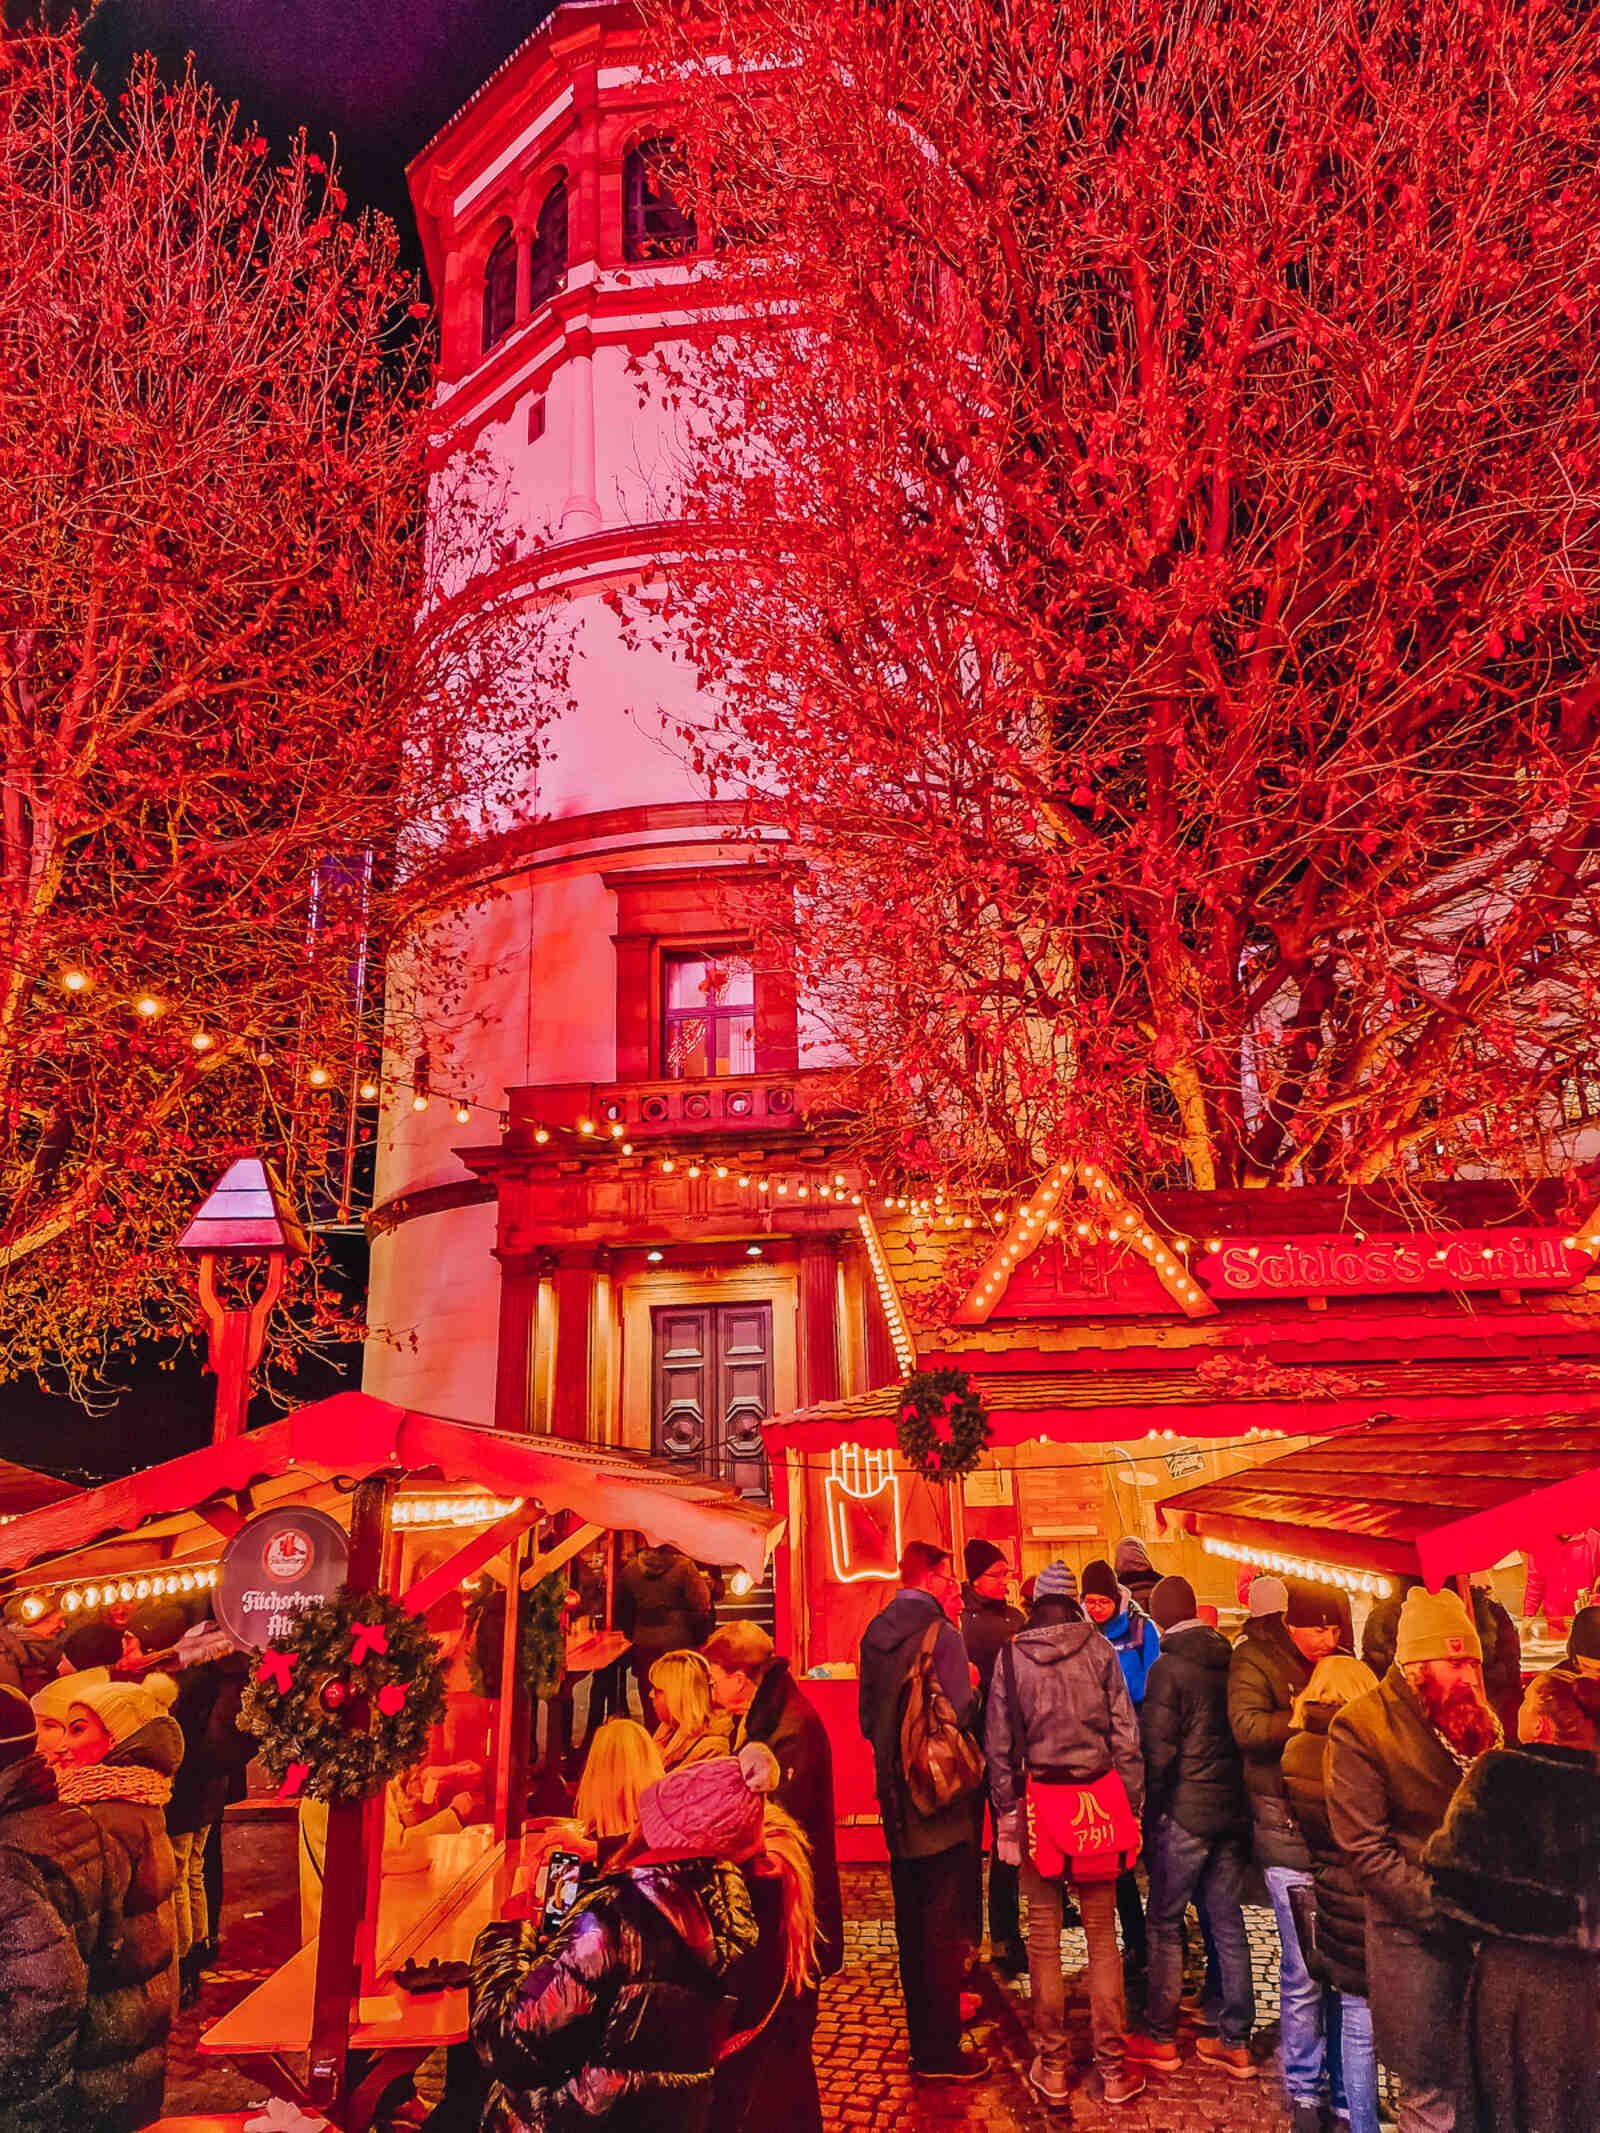 Bright red lights at the Dusseldorf Christmas market